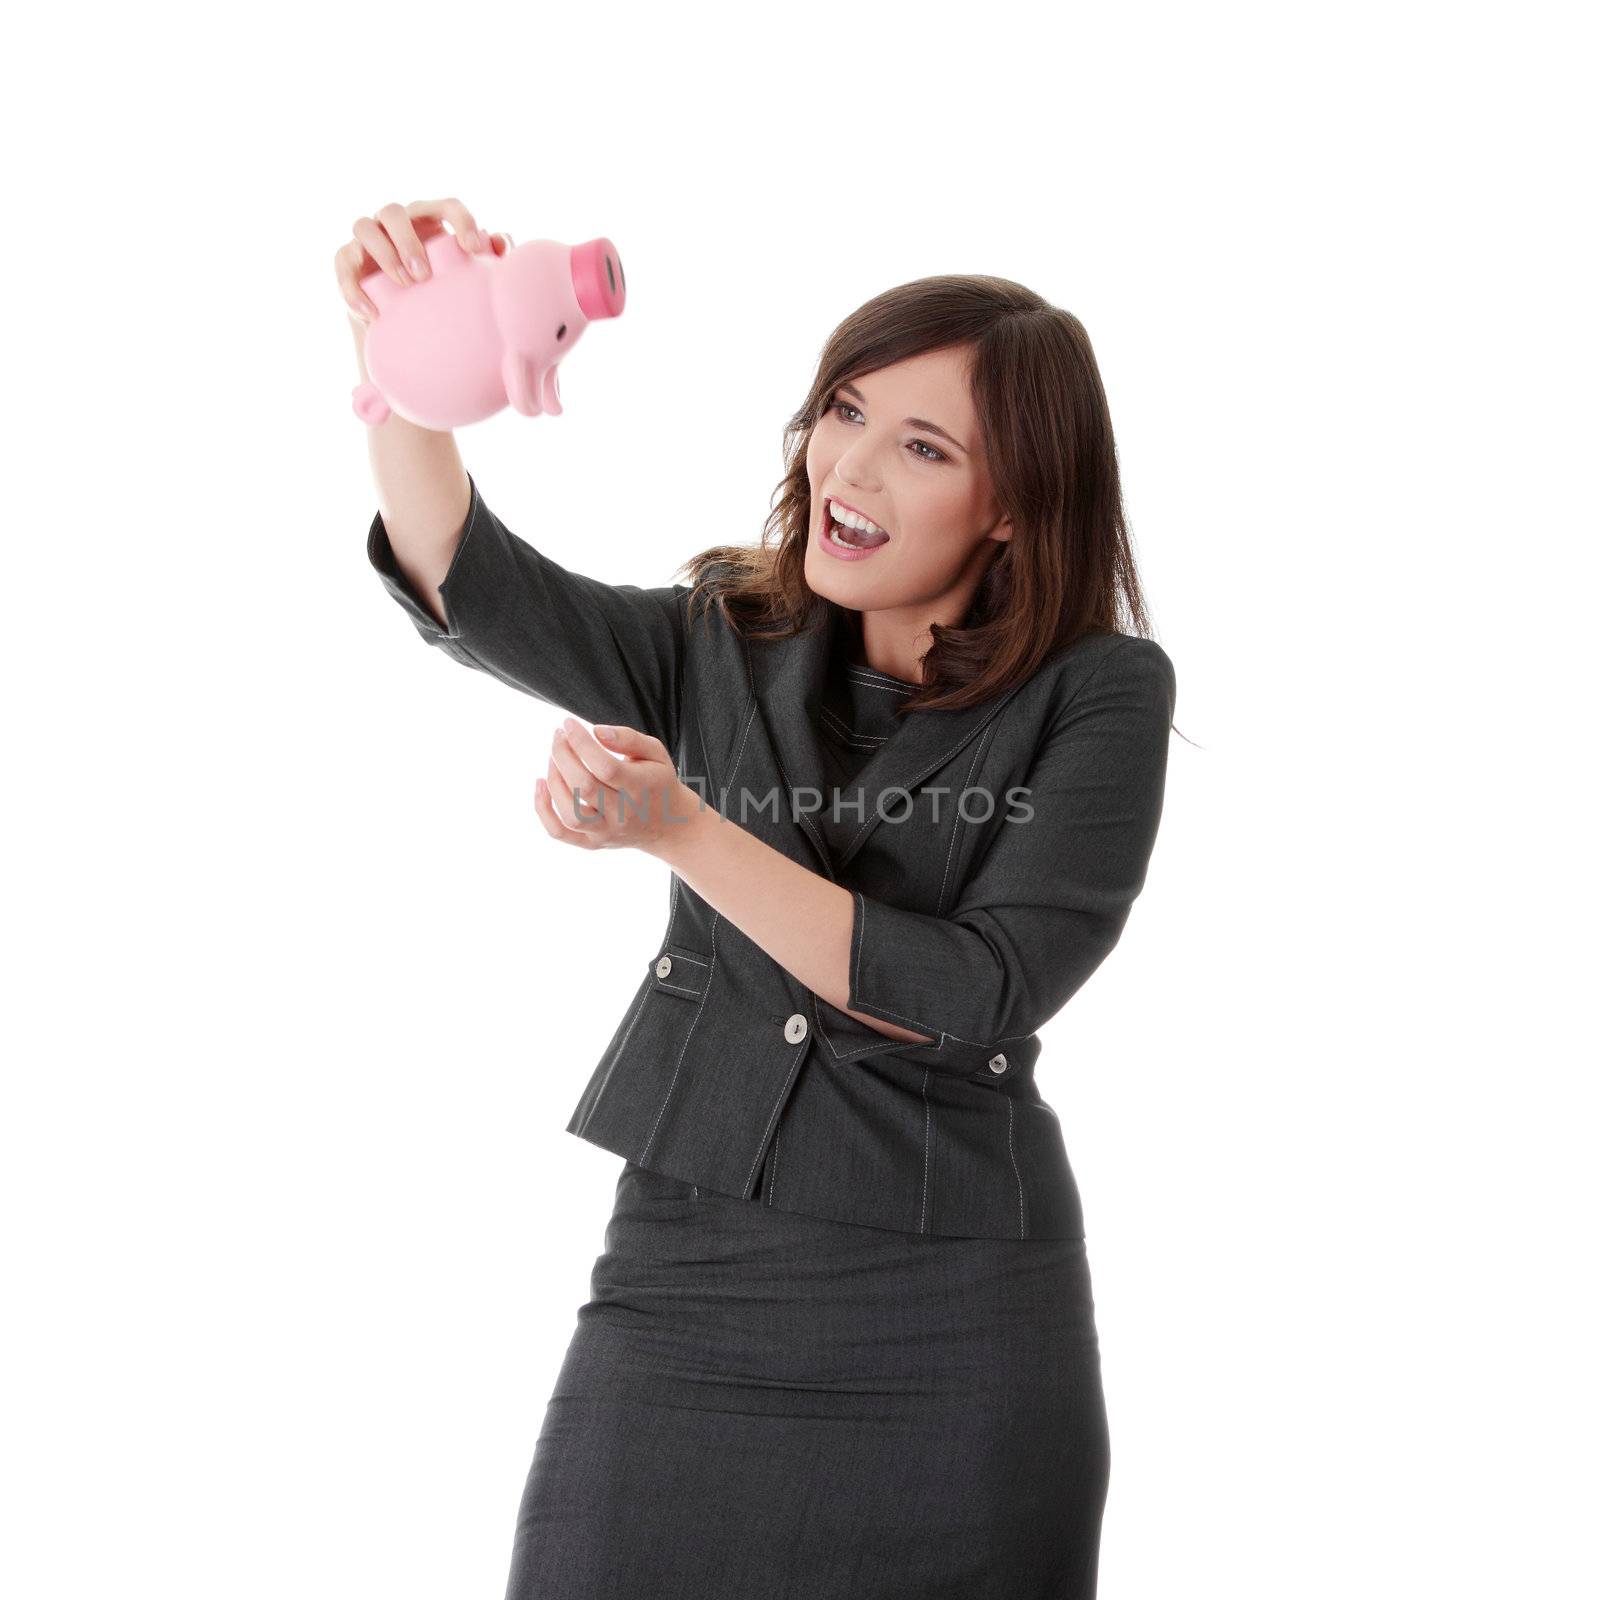 Savings concept - a woman with a piggy bank trying to get out some money - isolated over white